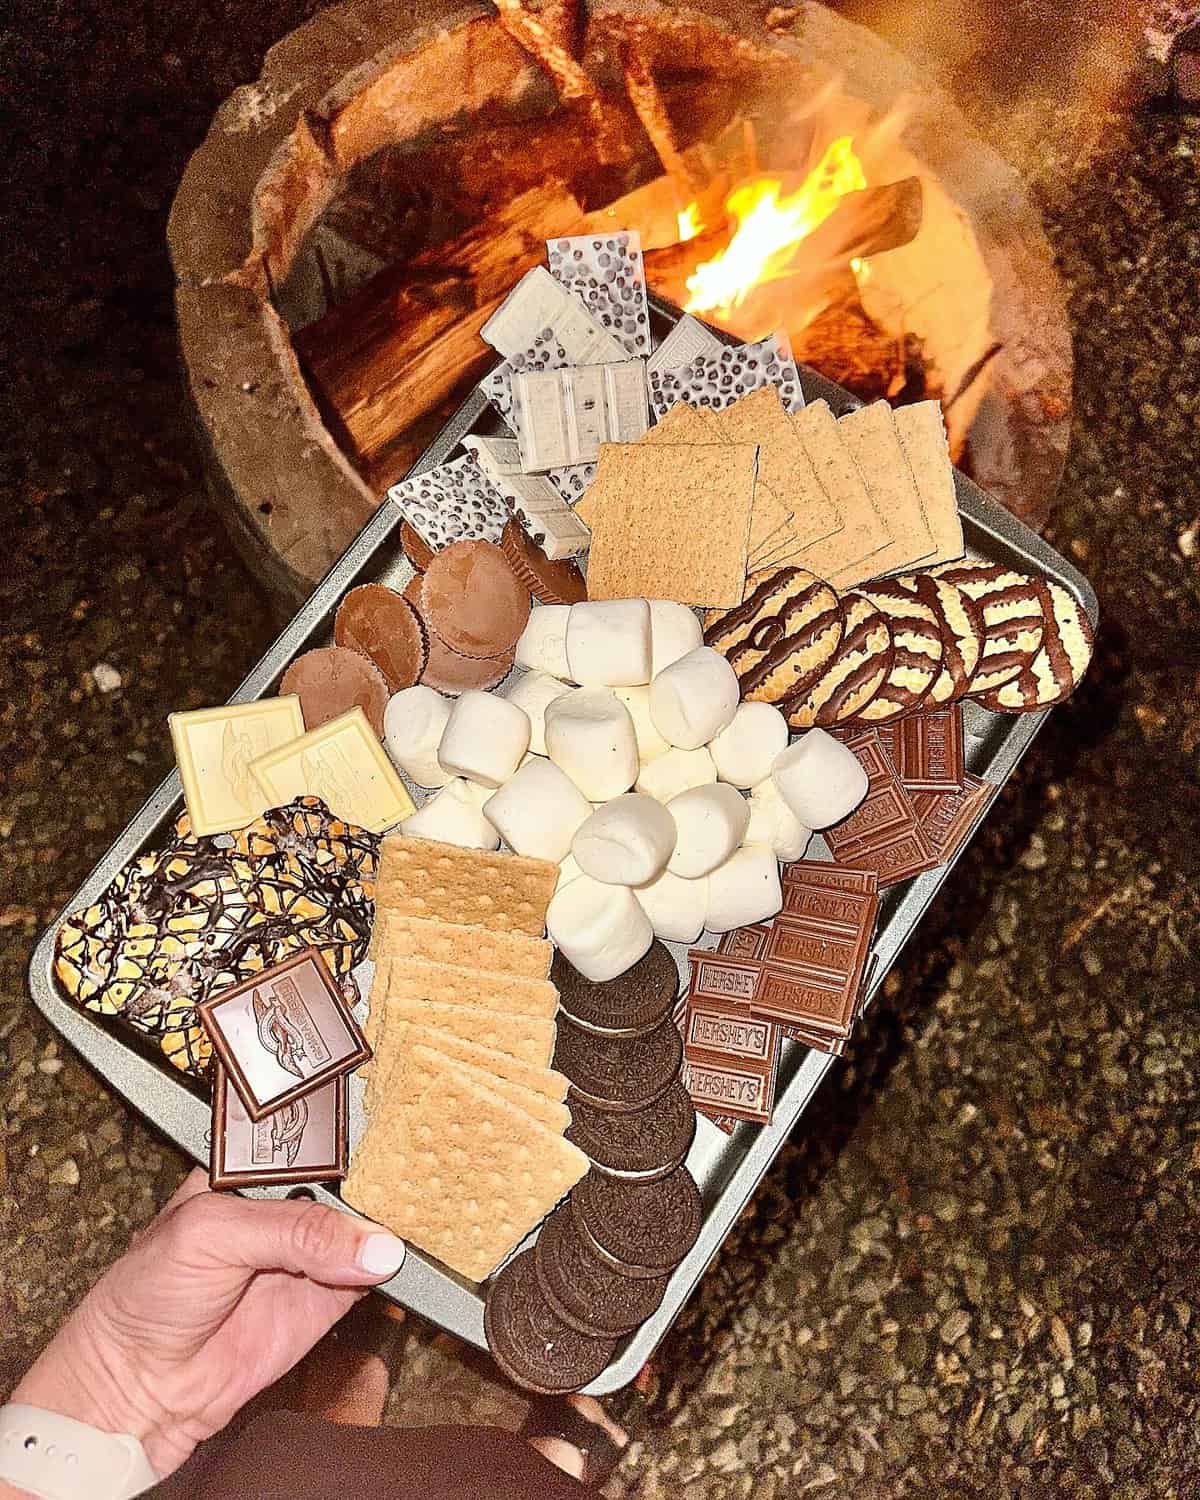 A baking tray filled with marshmallows, graham crackers, chocolate, fudge striped cookies in front of a fire pit.